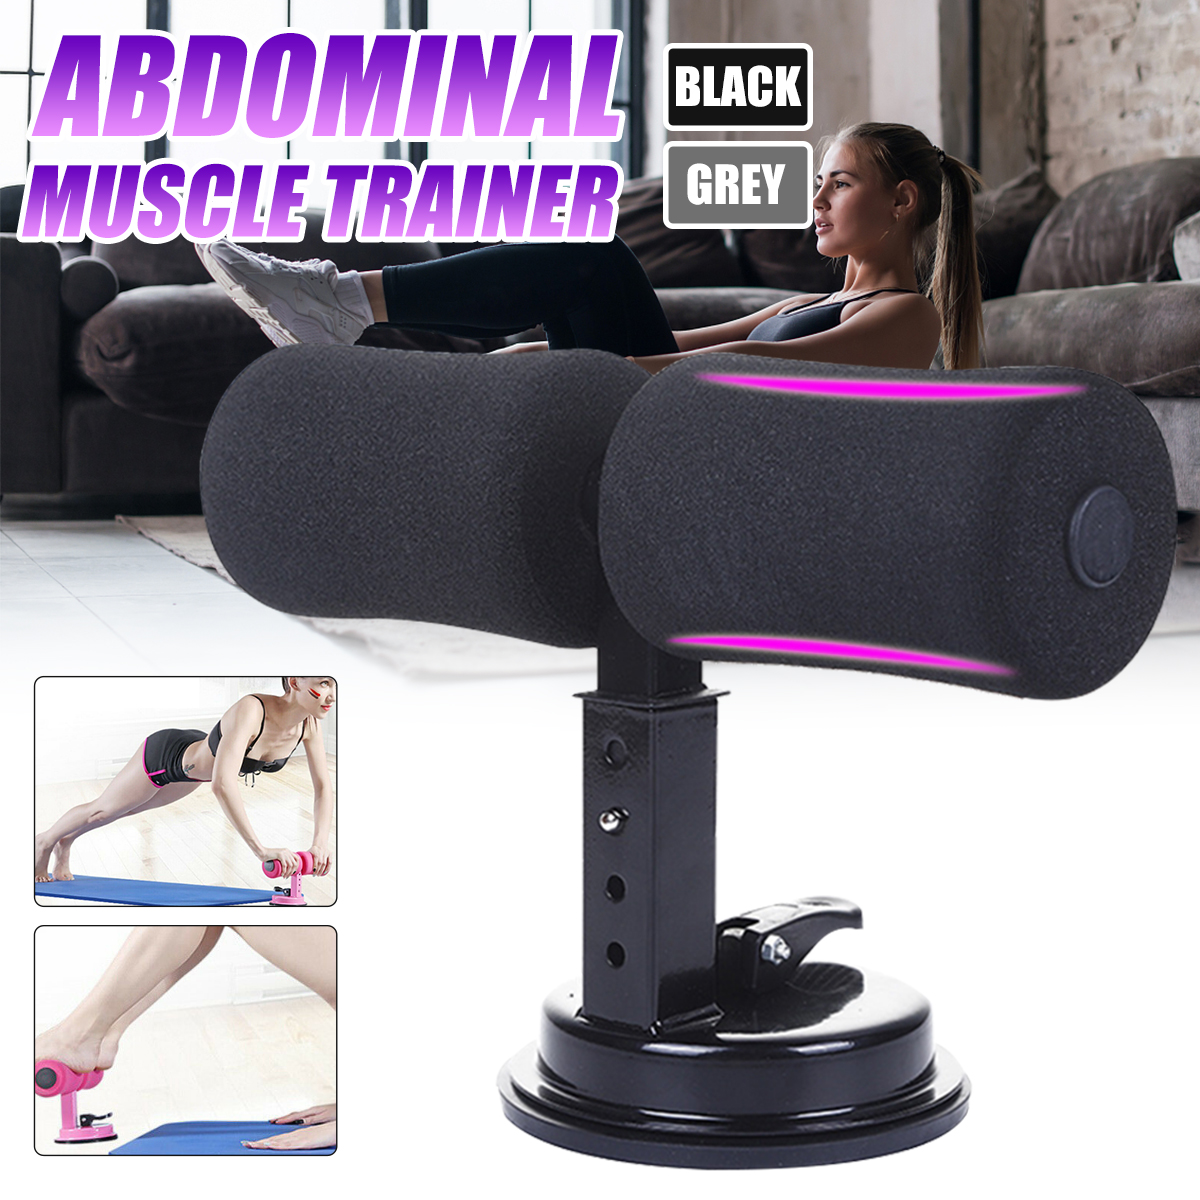 Home-Sports-Fitness-Sit-up-Aids-Gym-Exercise-Multifunctional-Abdominal-Muscle-Trainer-Push-up-Assist-1656622-2